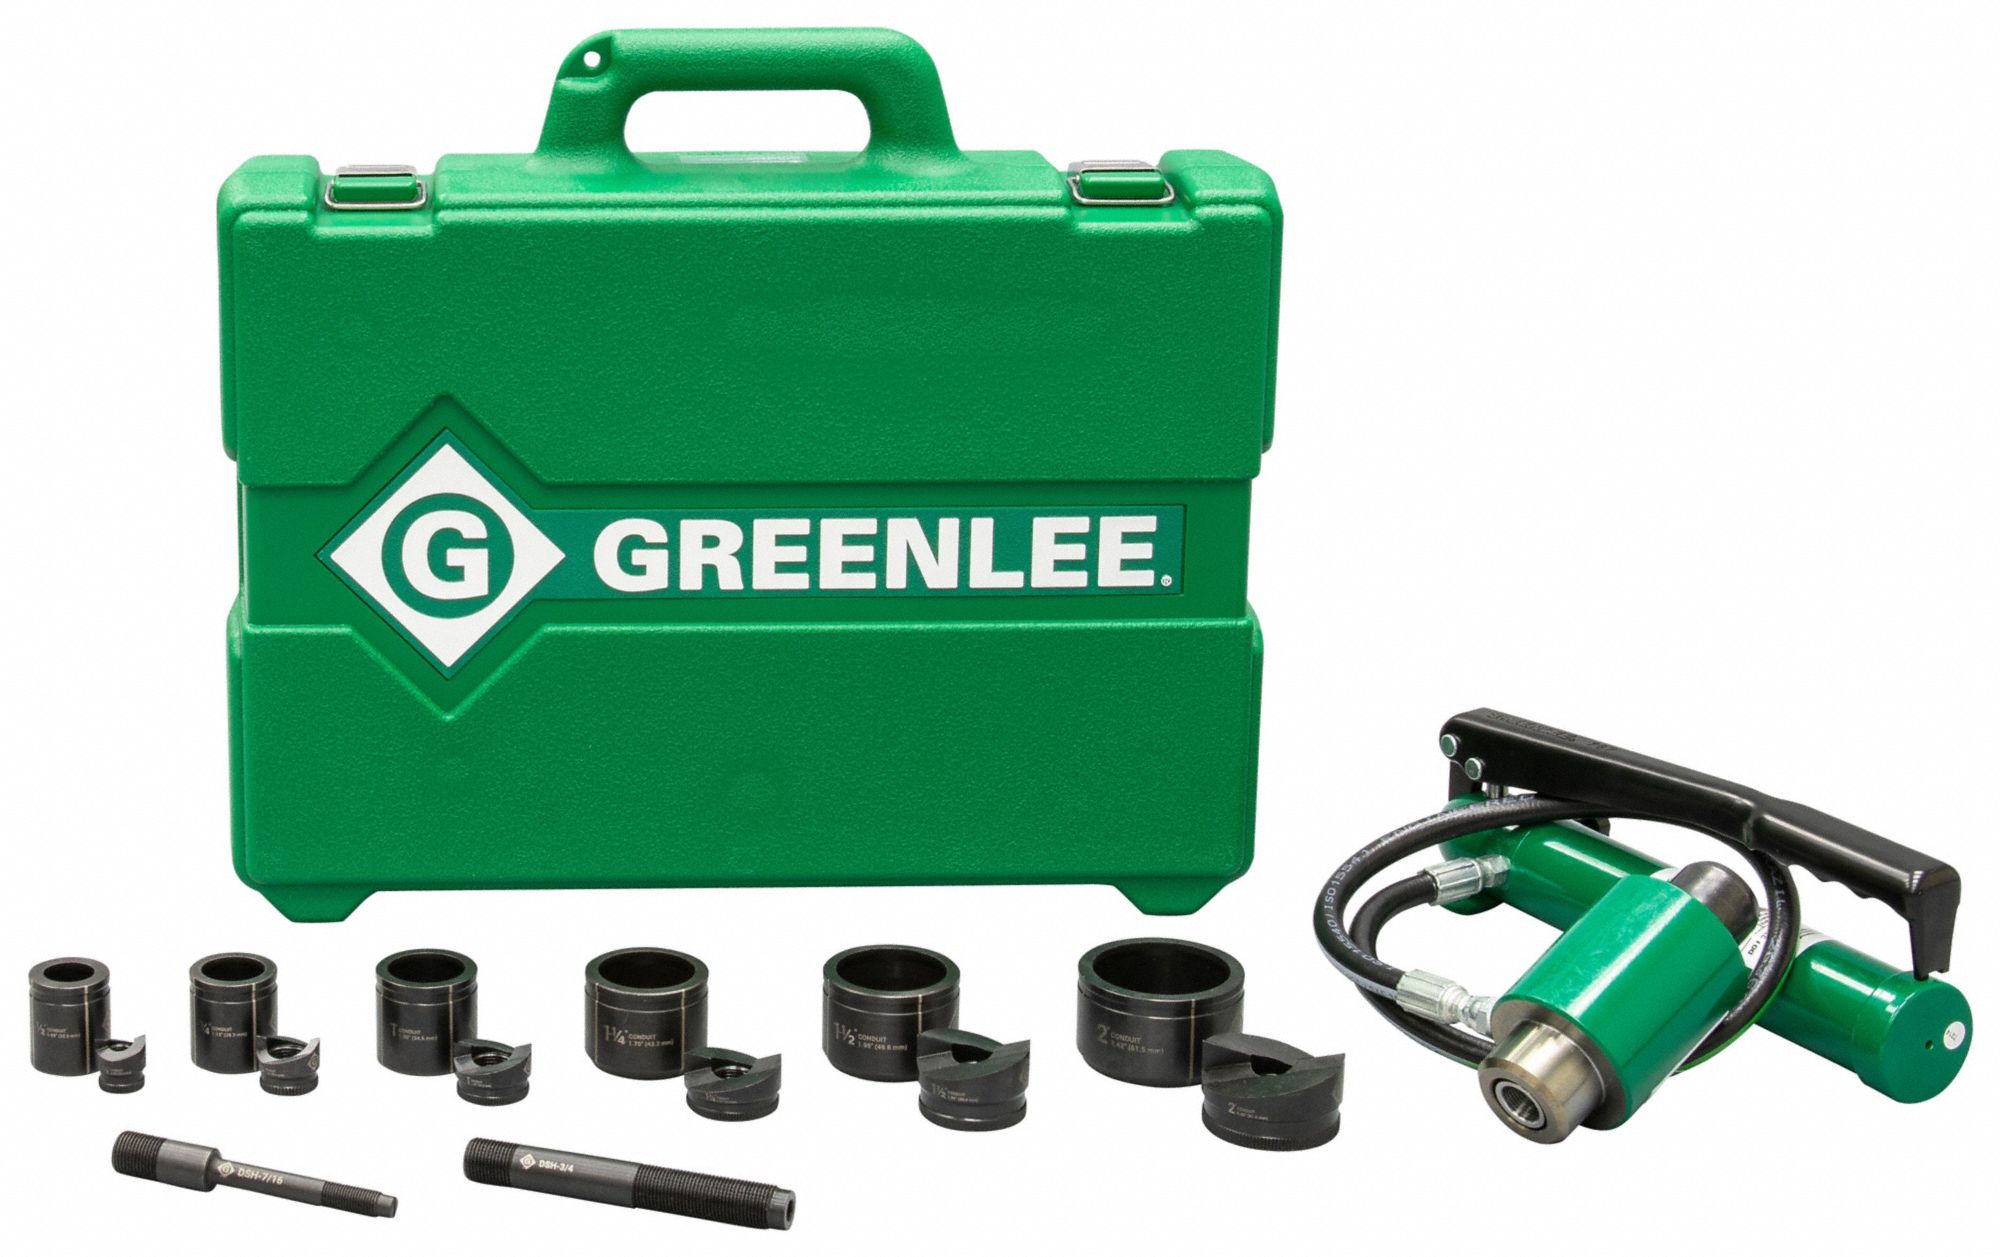 Greenlee 746 Hydraulic Knockout Punch RAM 1 for sale online 